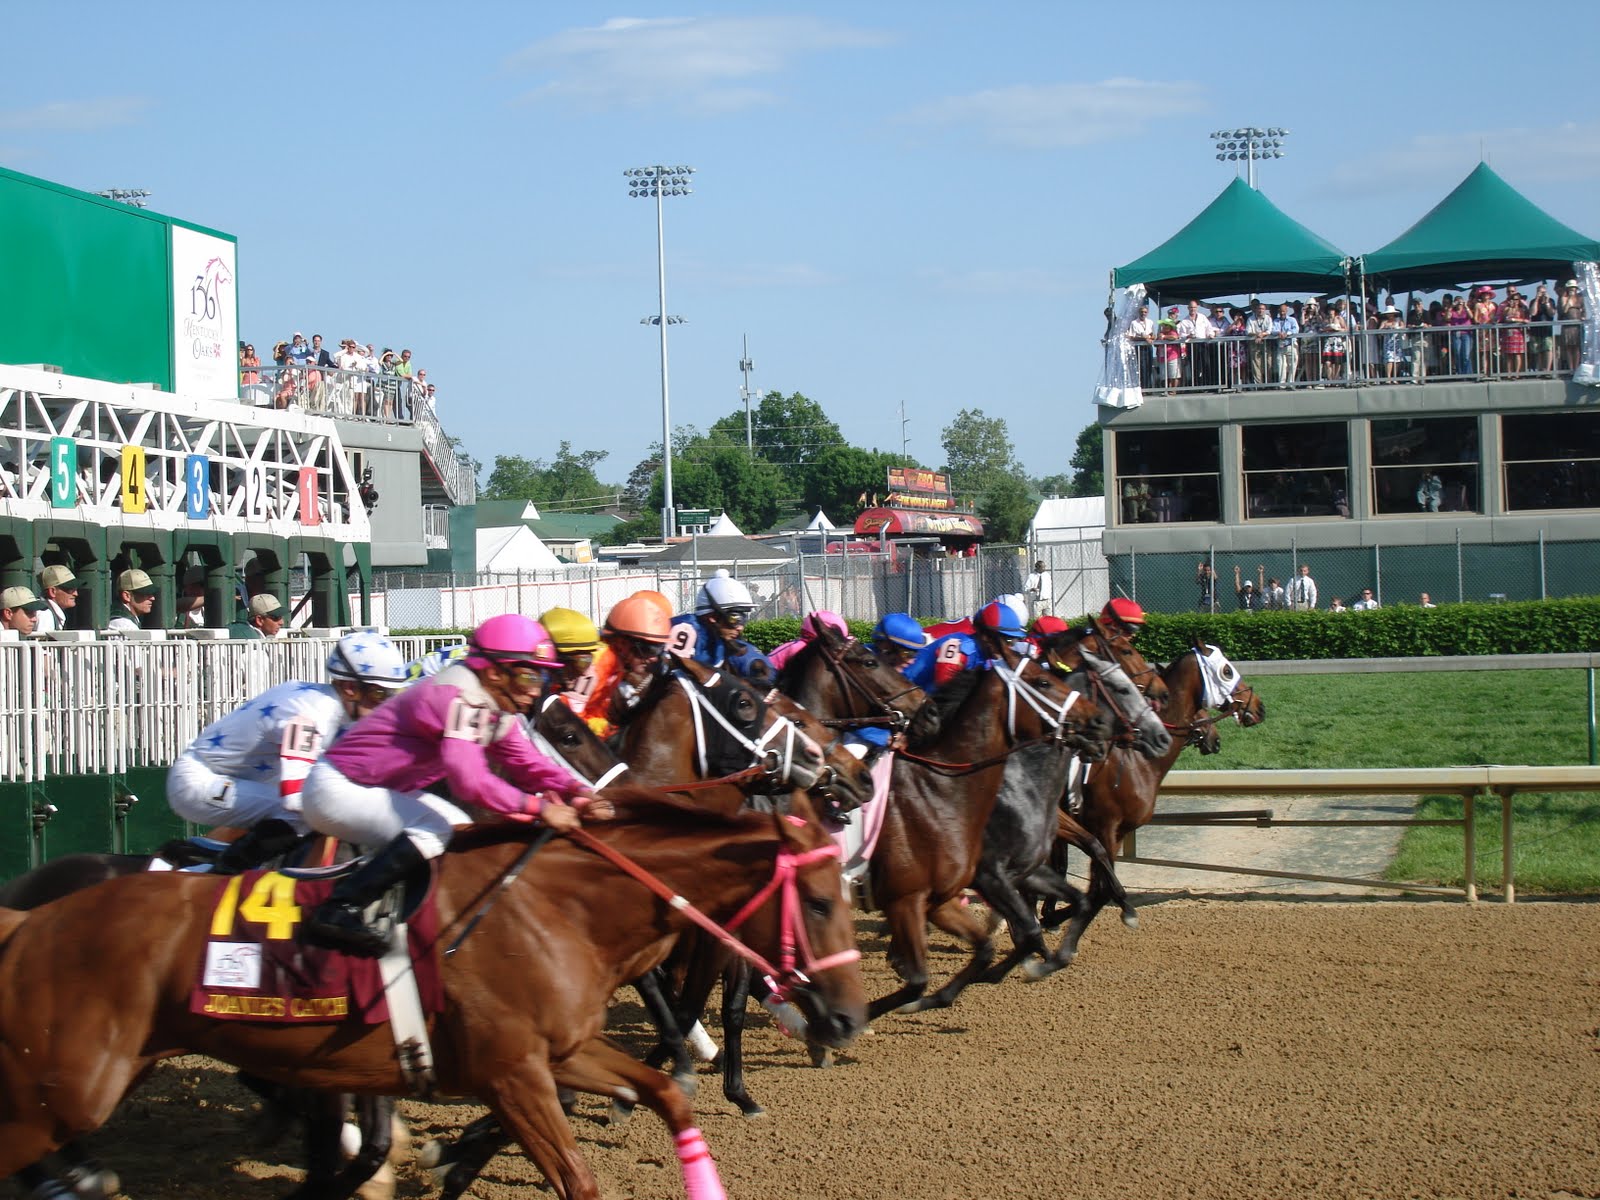 Beer Sponsorships White Claw Seltzer to Sponsor the Kentucky Derby